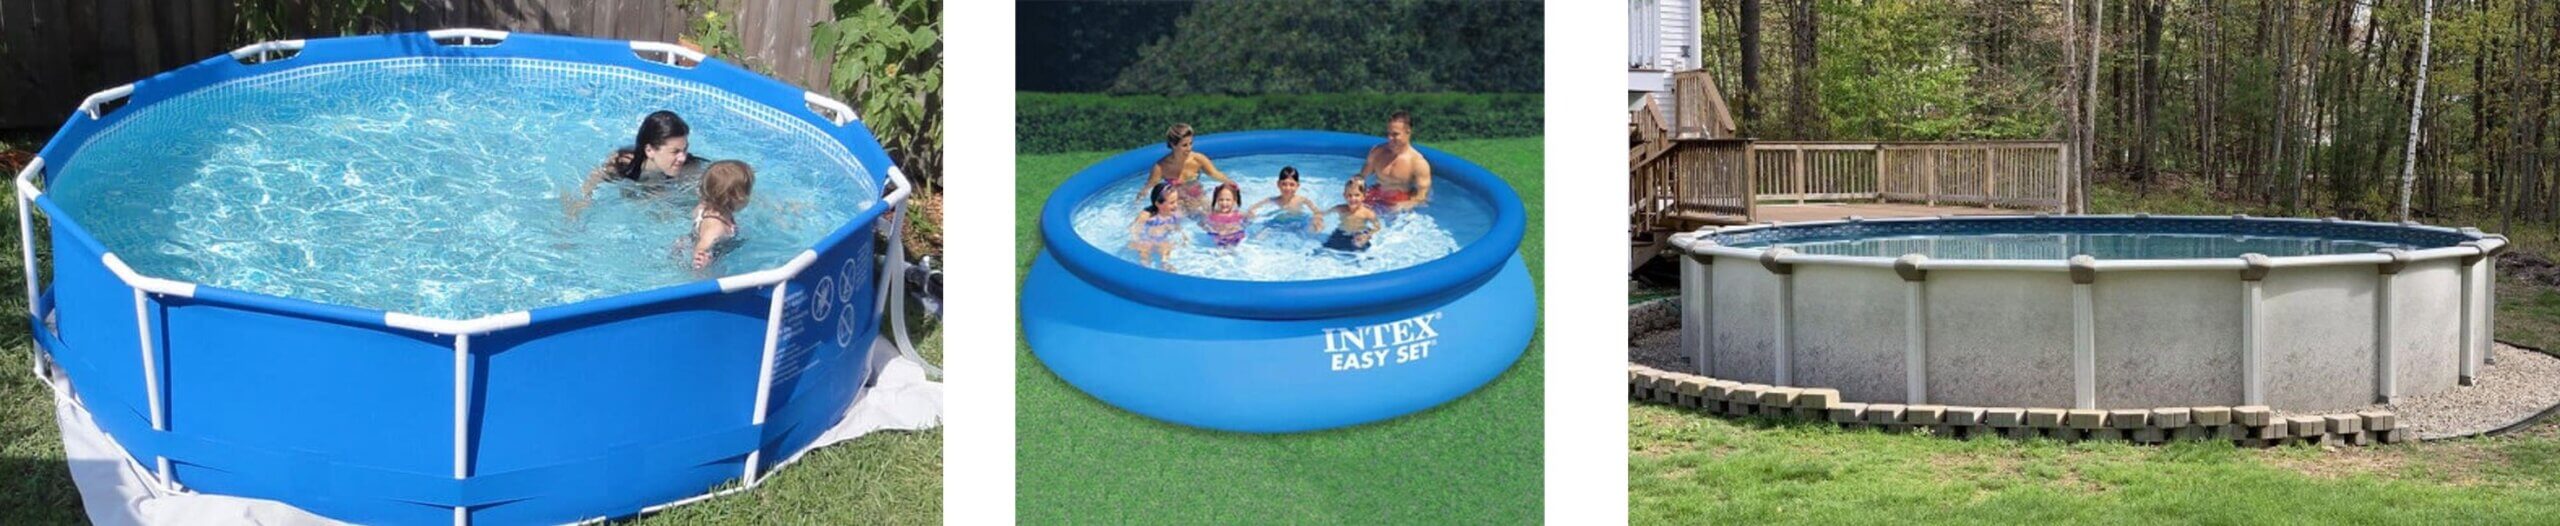 Cheap above ground pools